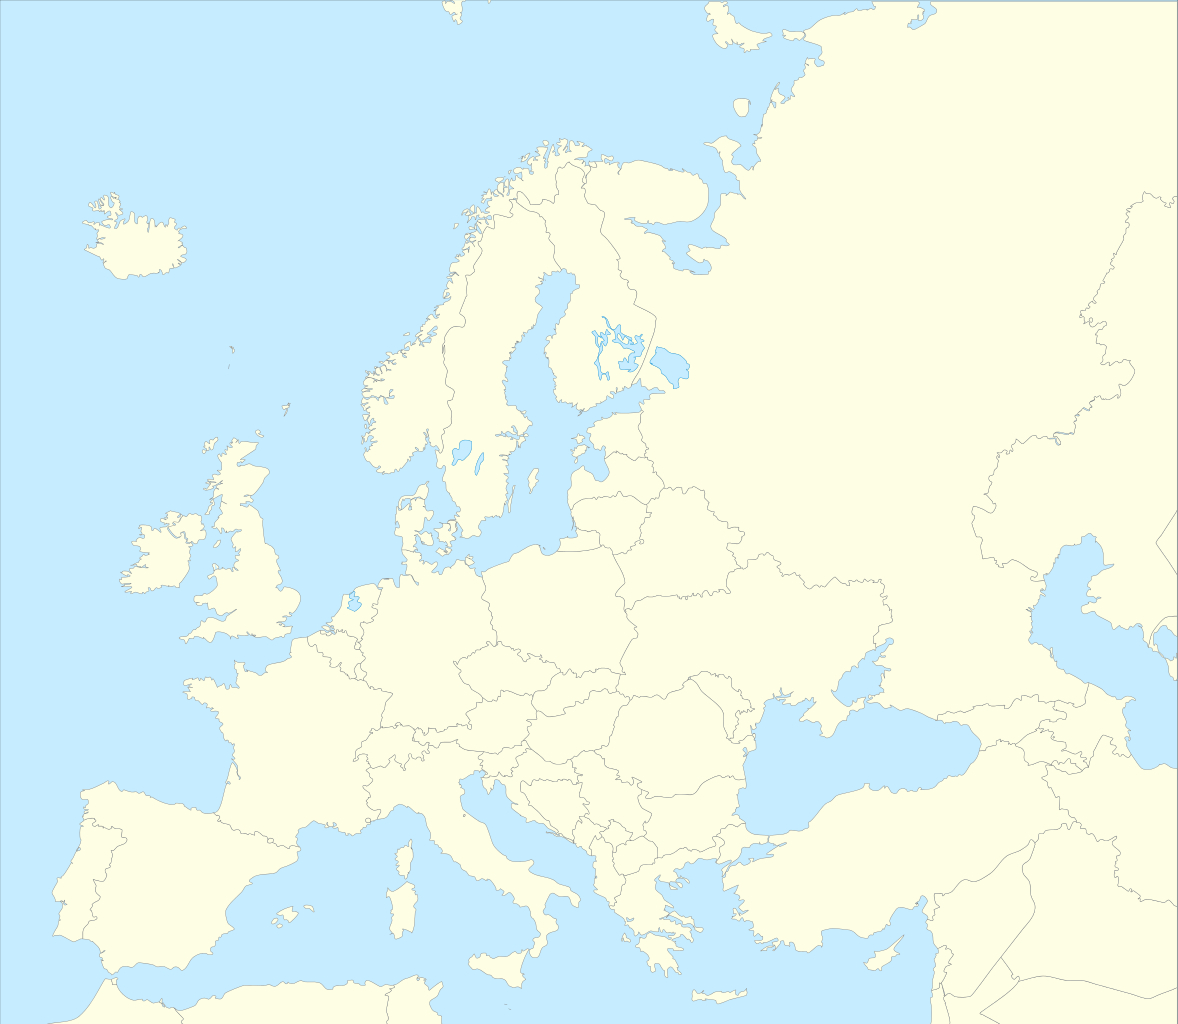 File:blank Map Of Europe - Atelier Graphique Colors With dedans Ateliers Graphiques Ps